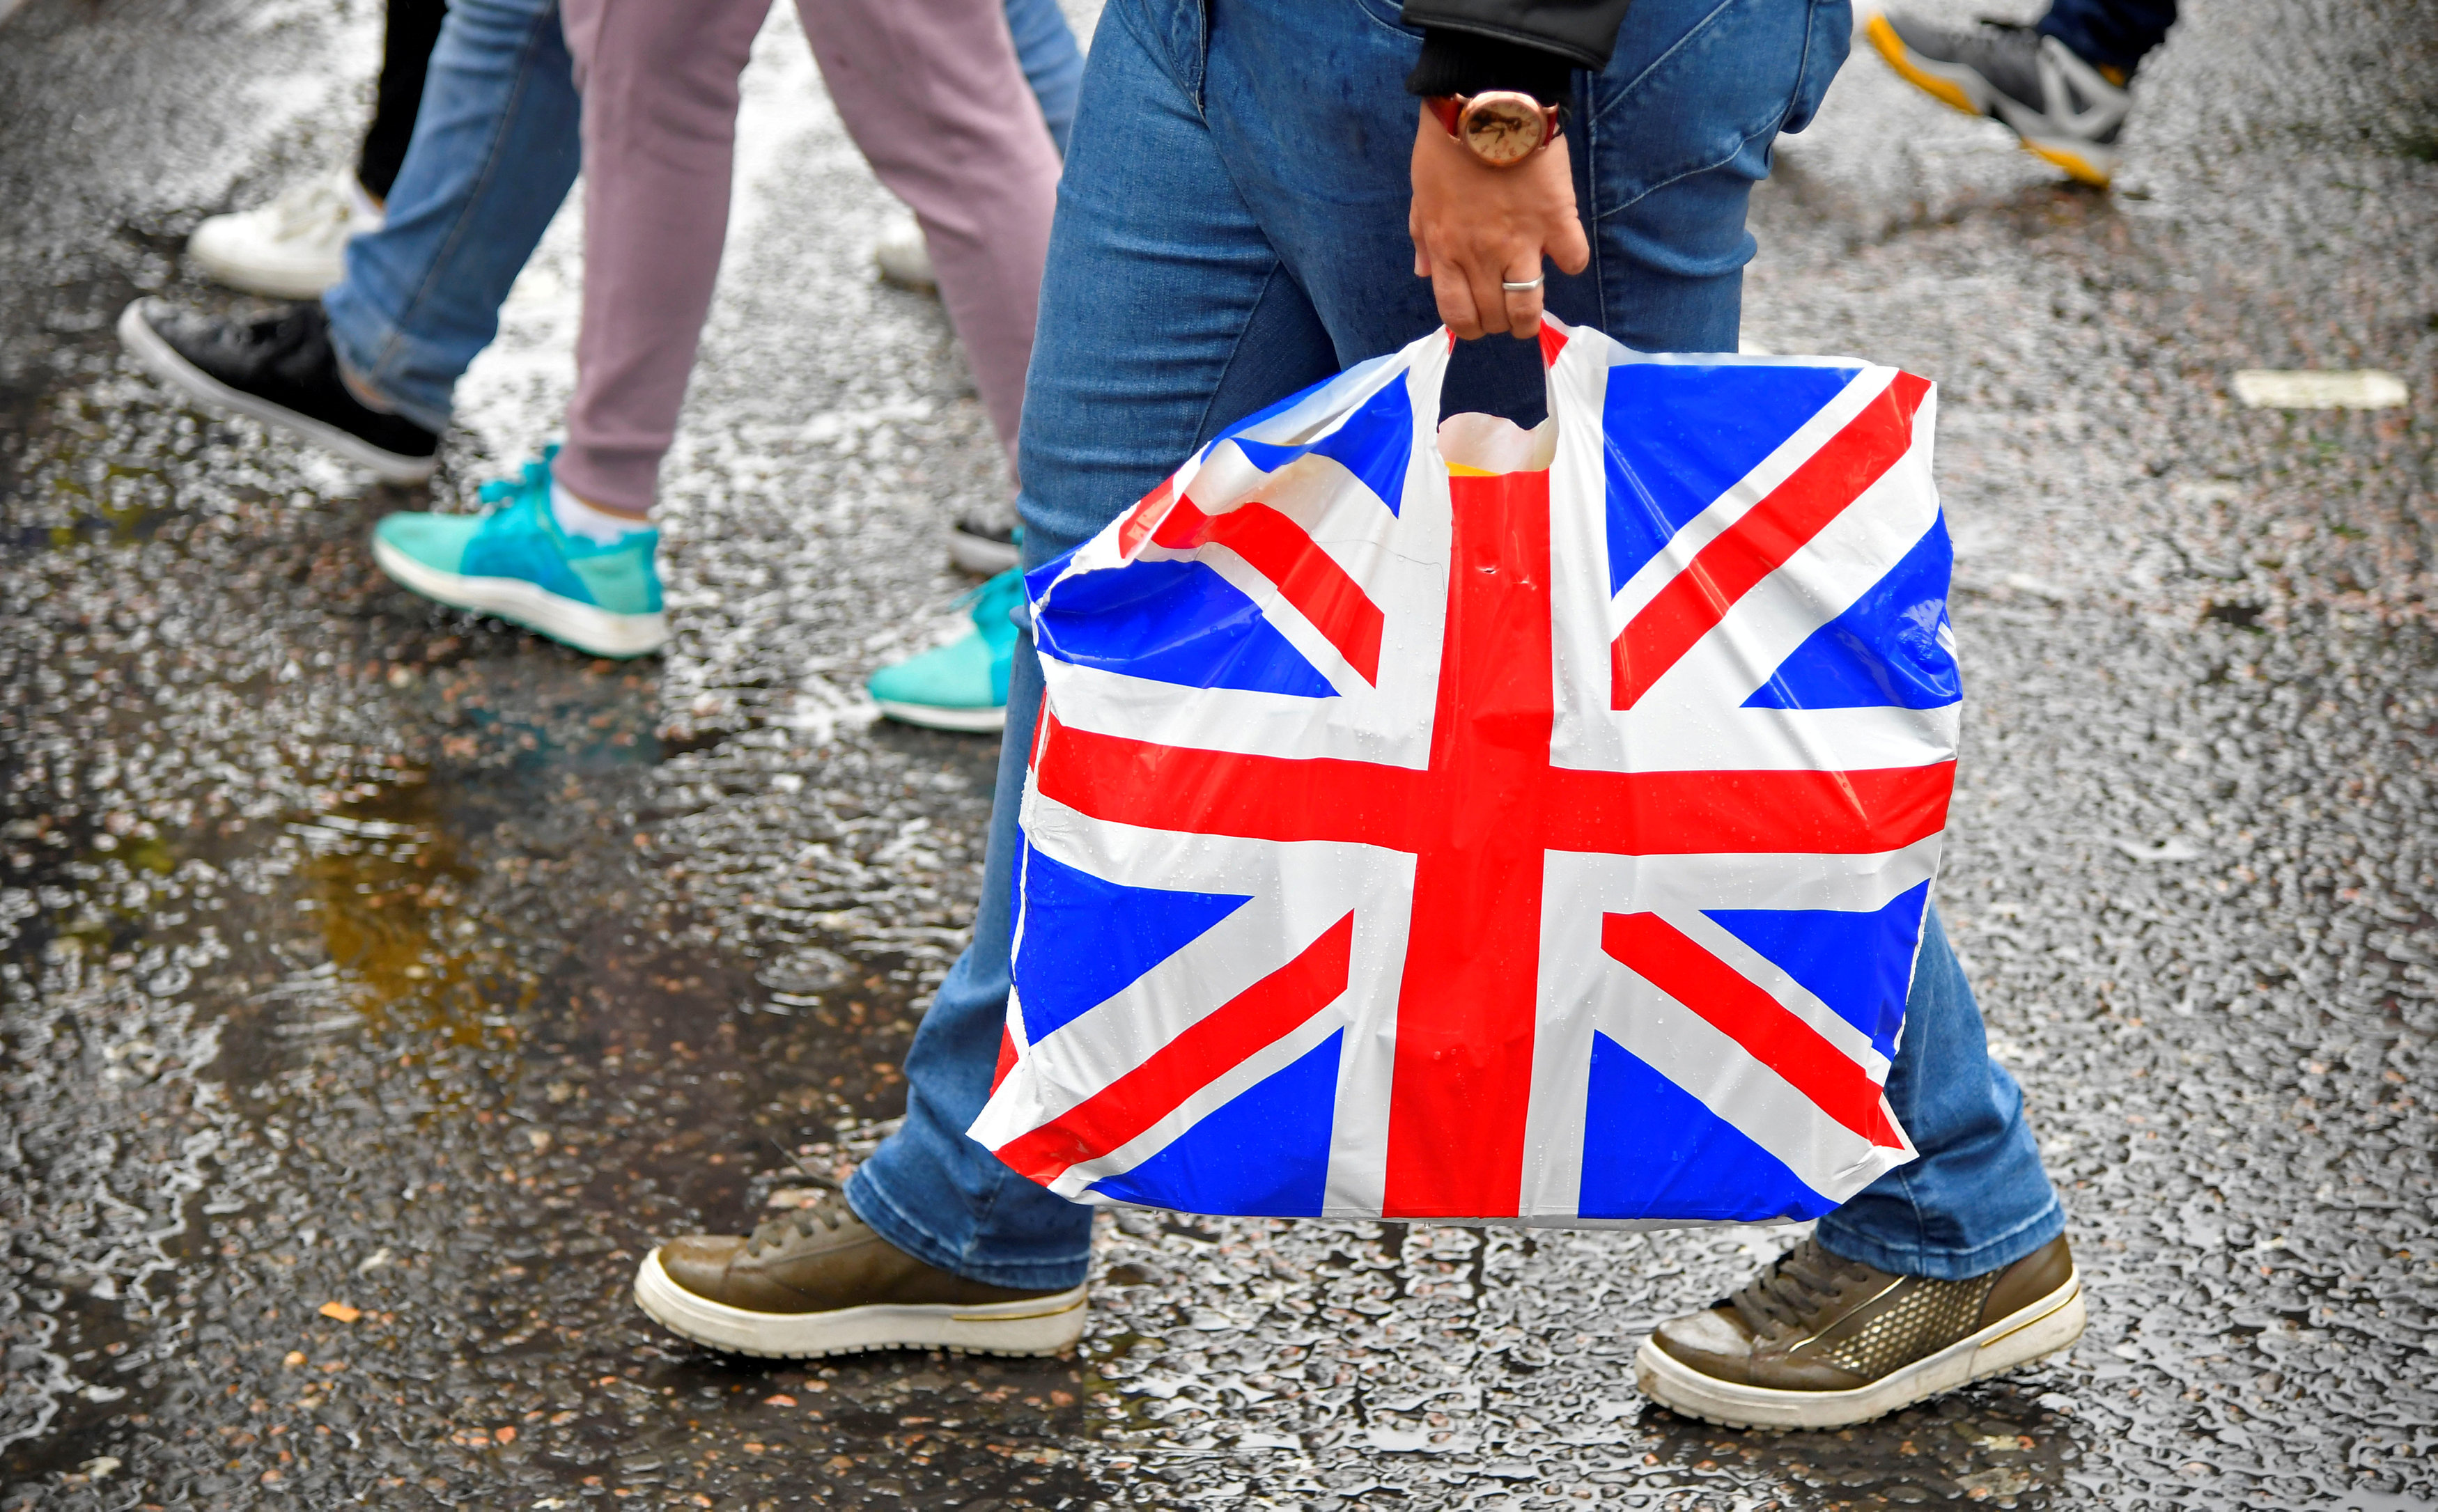 FILE PHOTO: A pedestrian carries a British union flag design plastic bag in Leicester Square in London, Britain